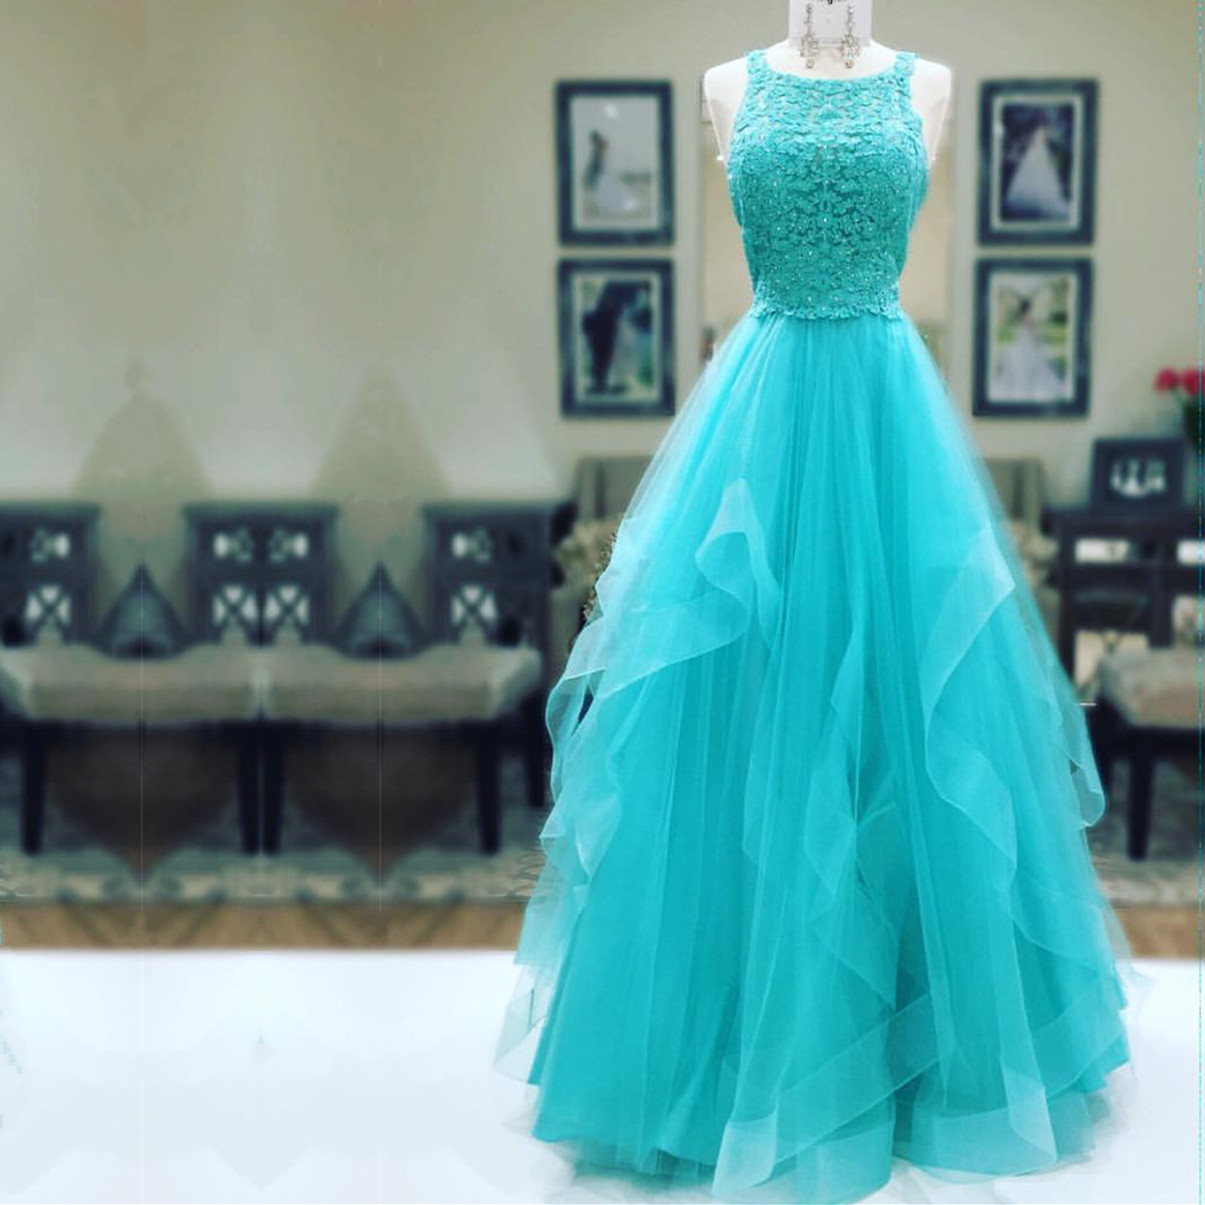 Turquoise Prom Dress,ball Gowns Prom Dress,elegant Prom Dress,sexy Prom Dresses 2017,lace Appliques Prom Gowns